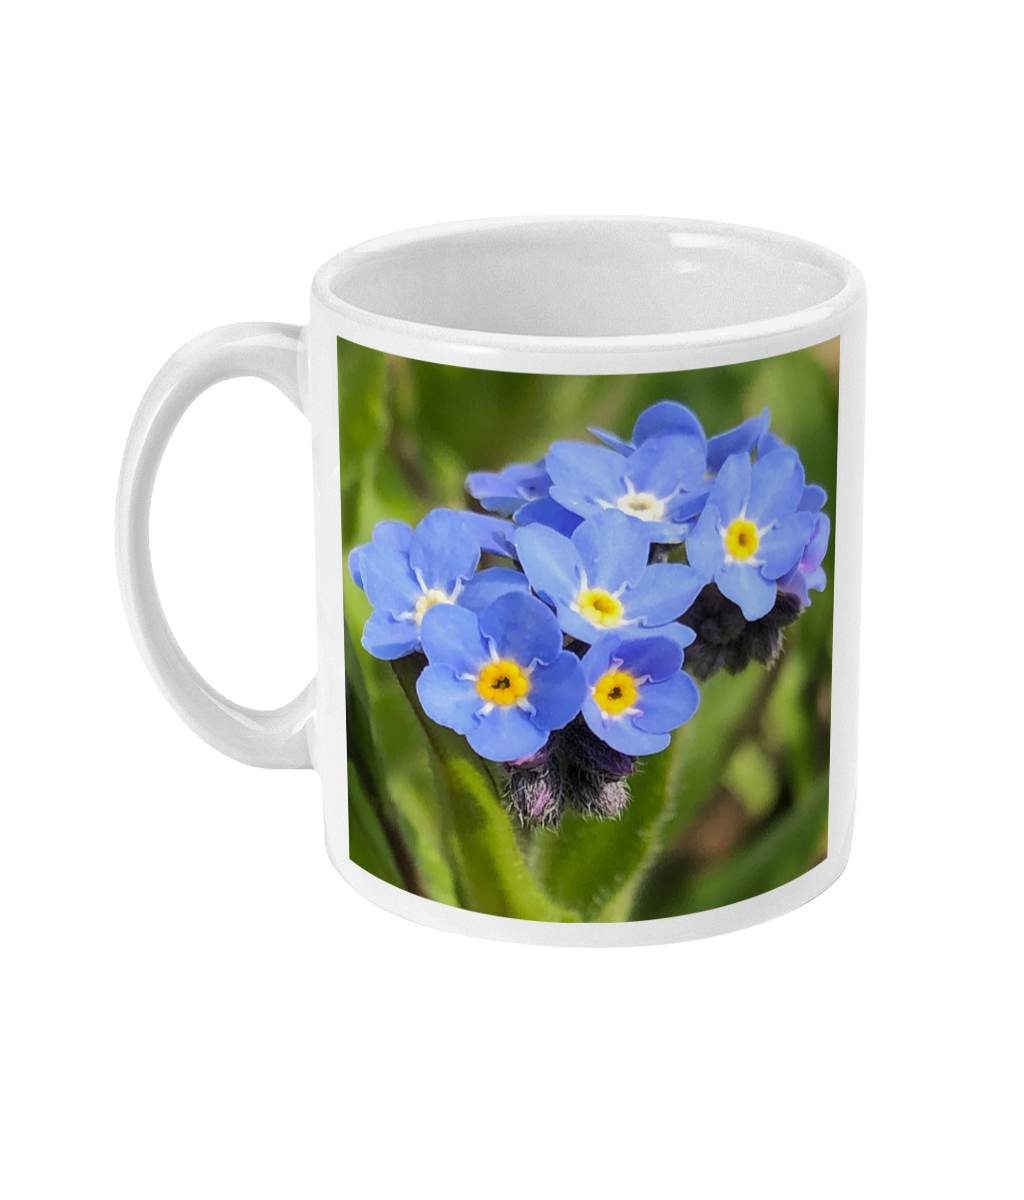 Blue Forget Me Not 2 Double Flower Mug - Nature of Flowers